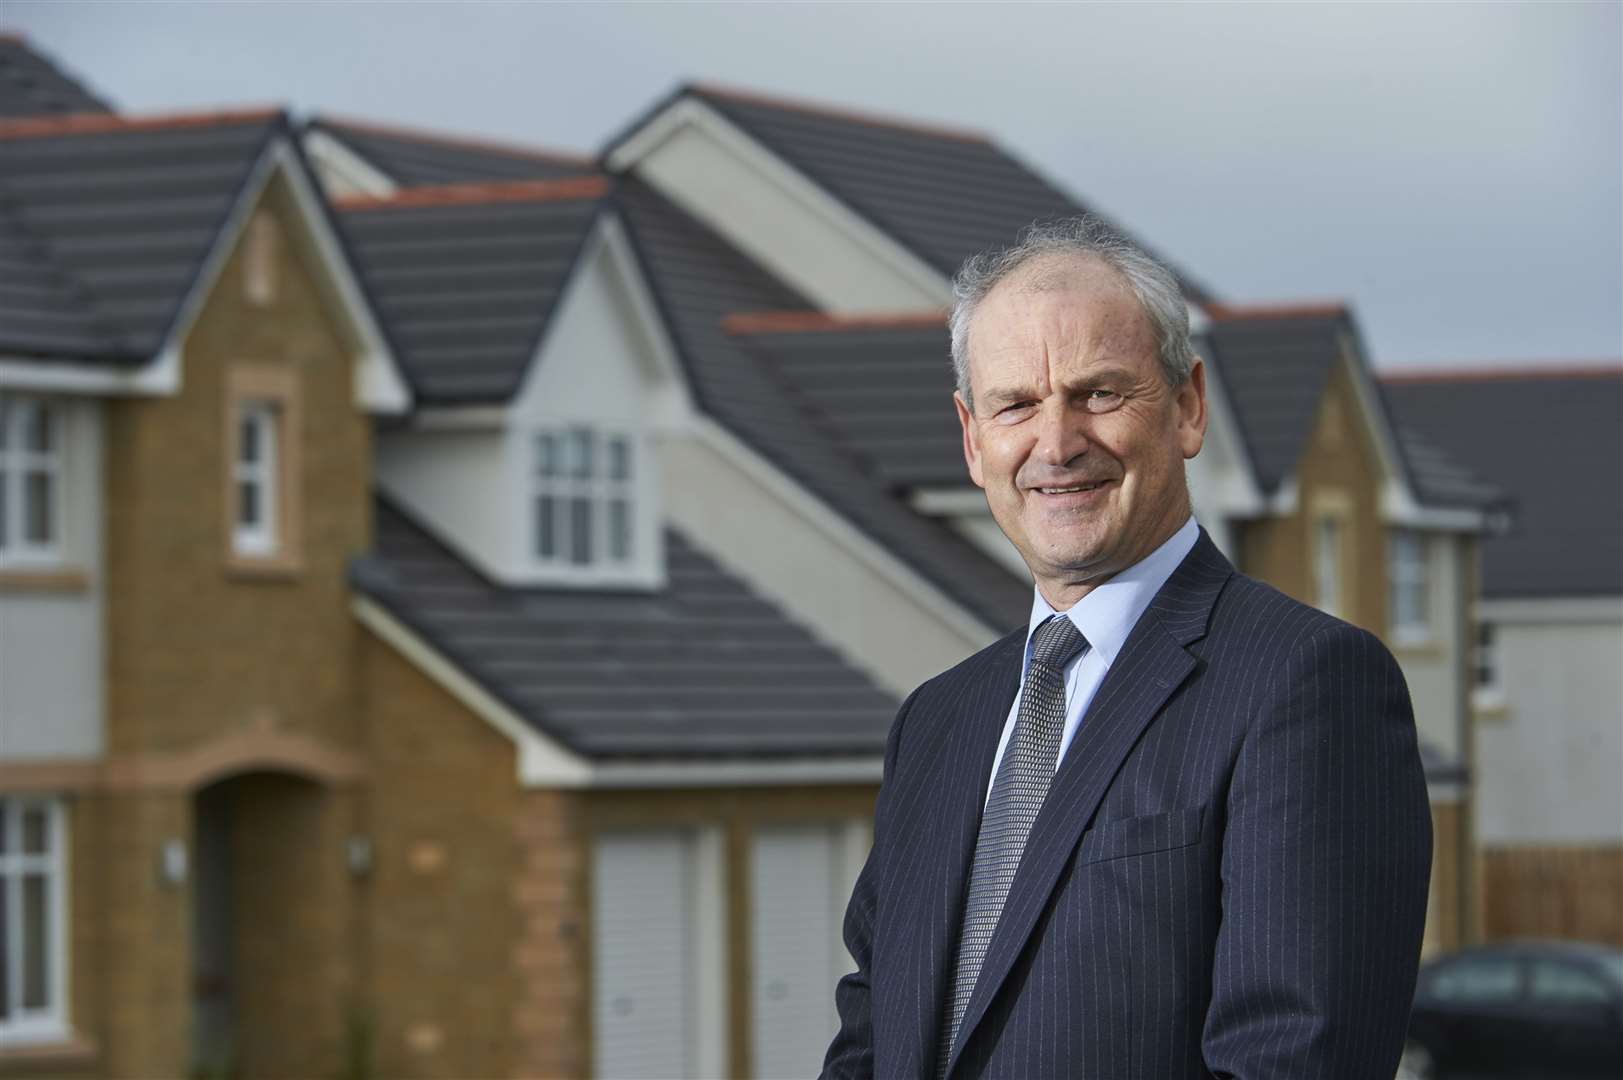 George Fraser, Chief Exec of Tulloch Homes pictured at one of their Inverness developments.